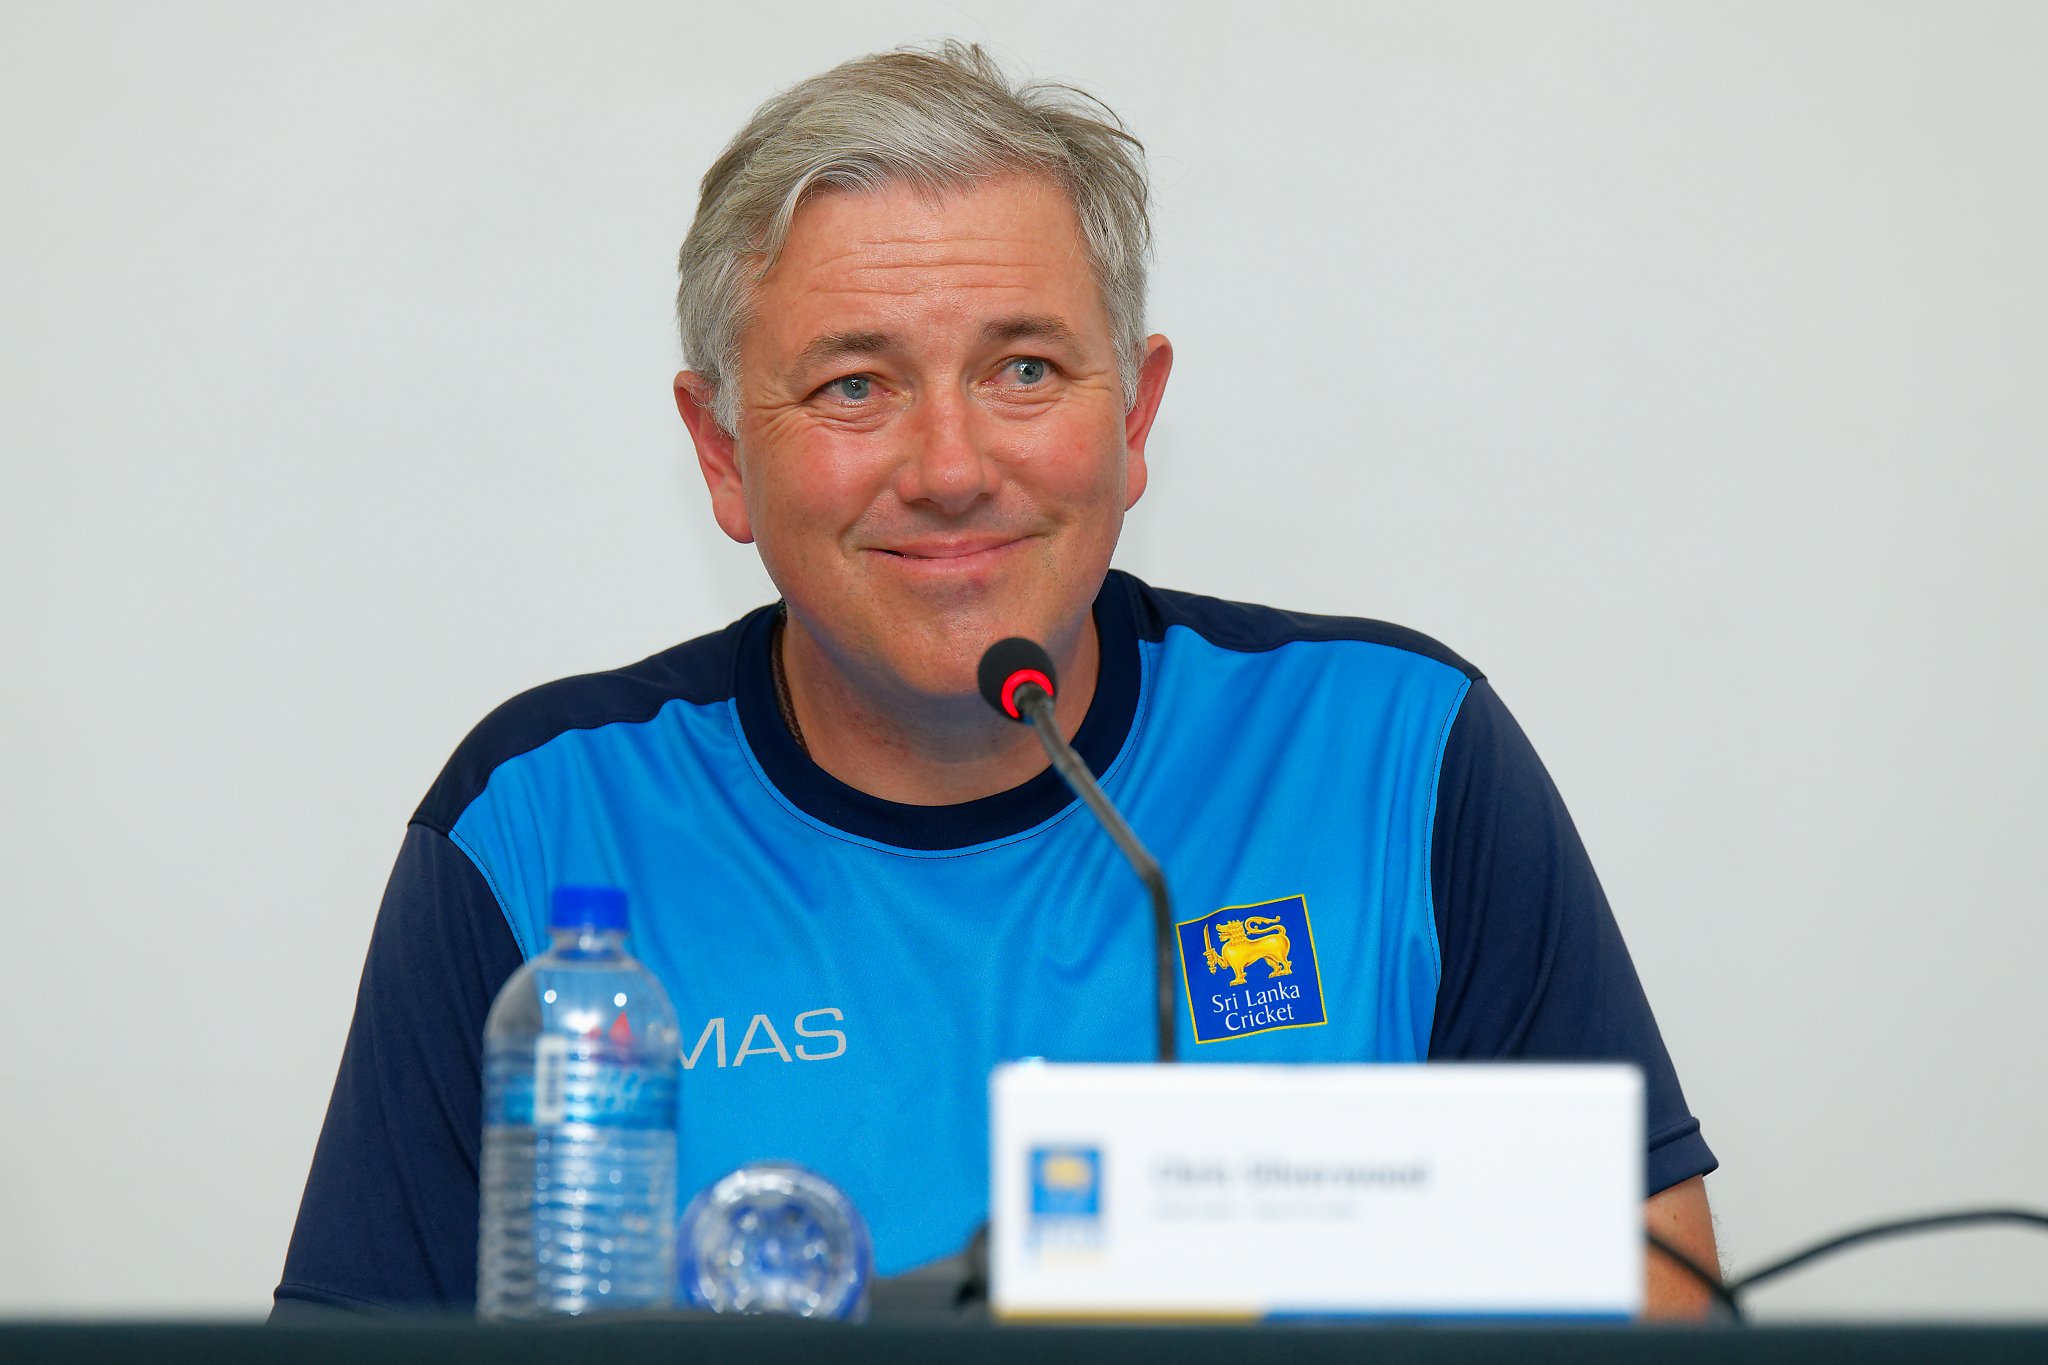 SL vs BAN | Sri Lanka batters should be brave and positive in the series against Bangladesh, says Chris Silverwood